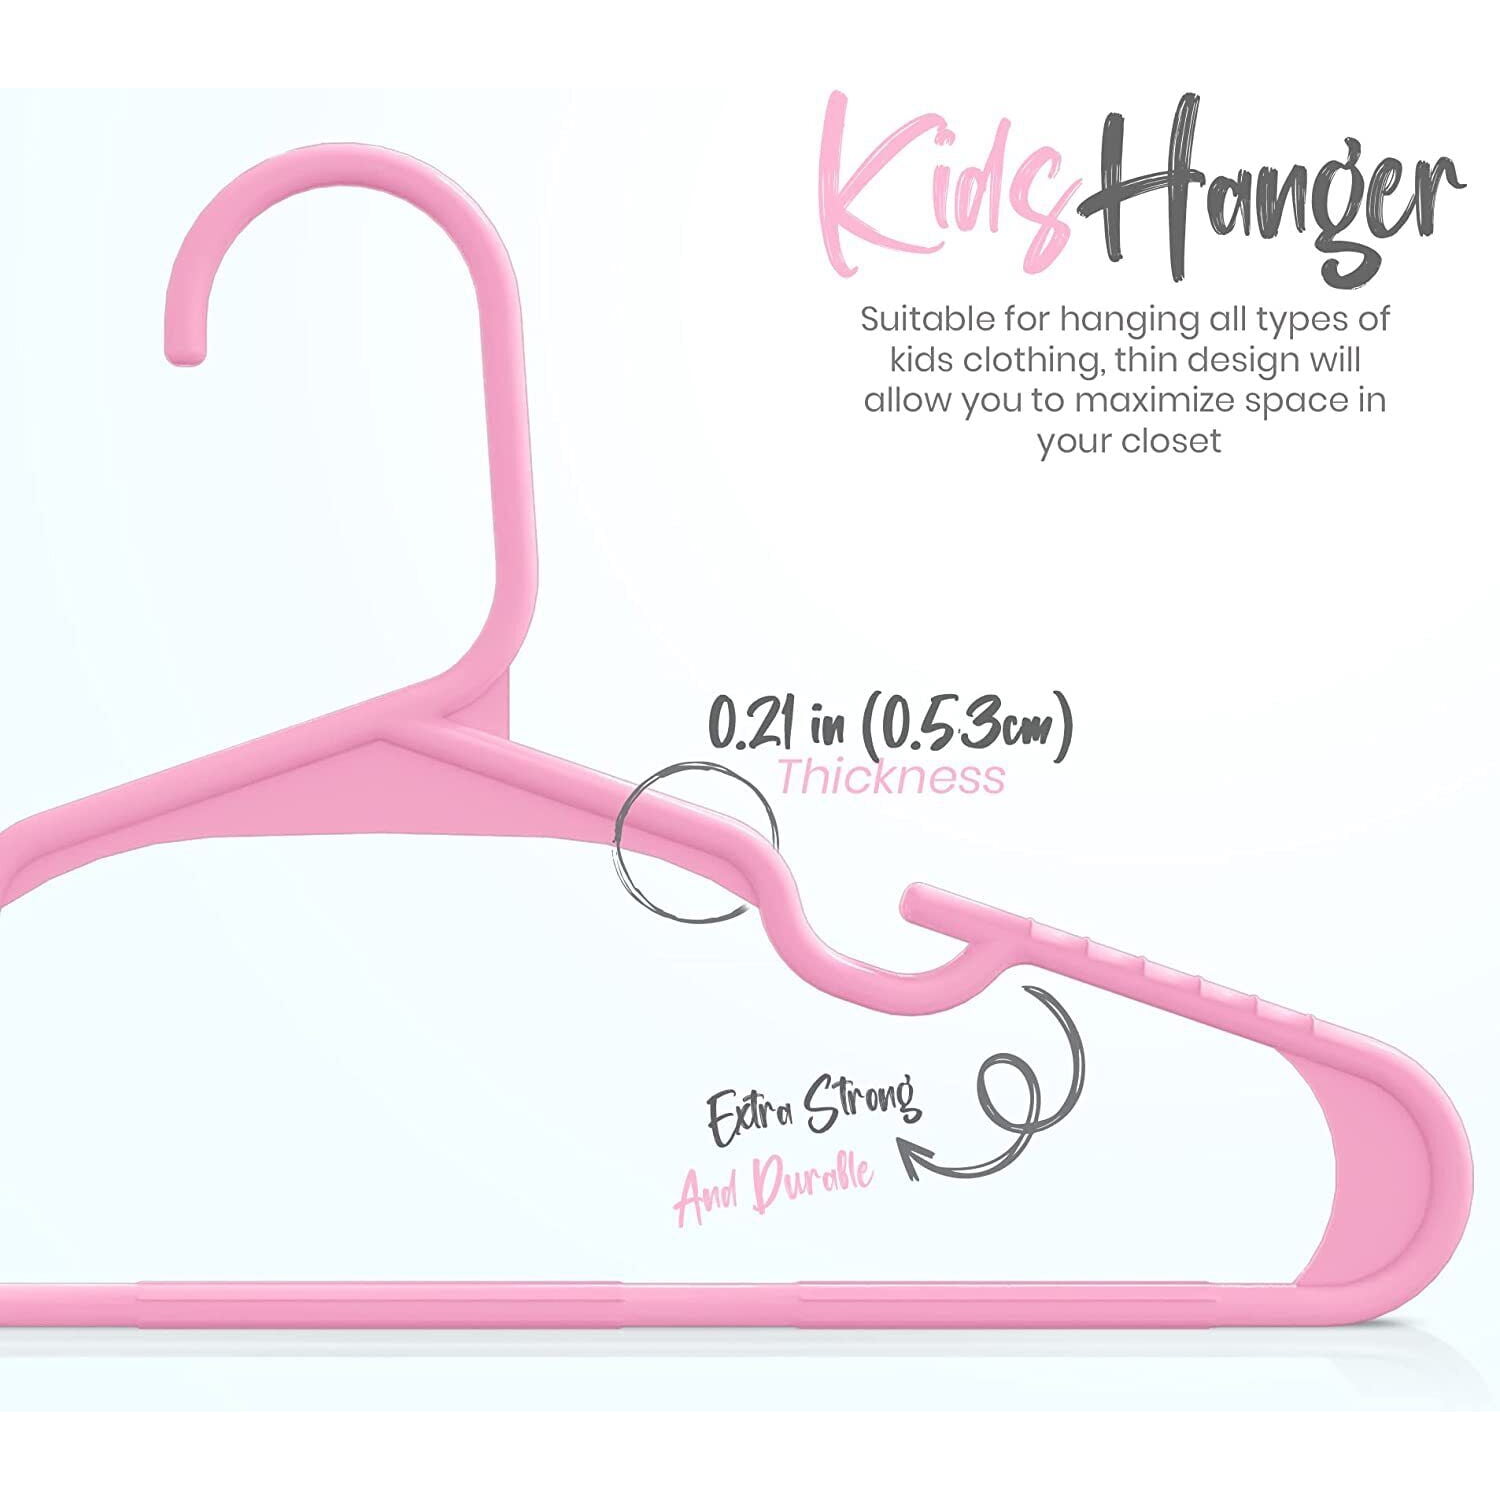 20-100 Pack Home Kids Hangers - 11. 4 Inch Plastic Baby Hangers for Closet